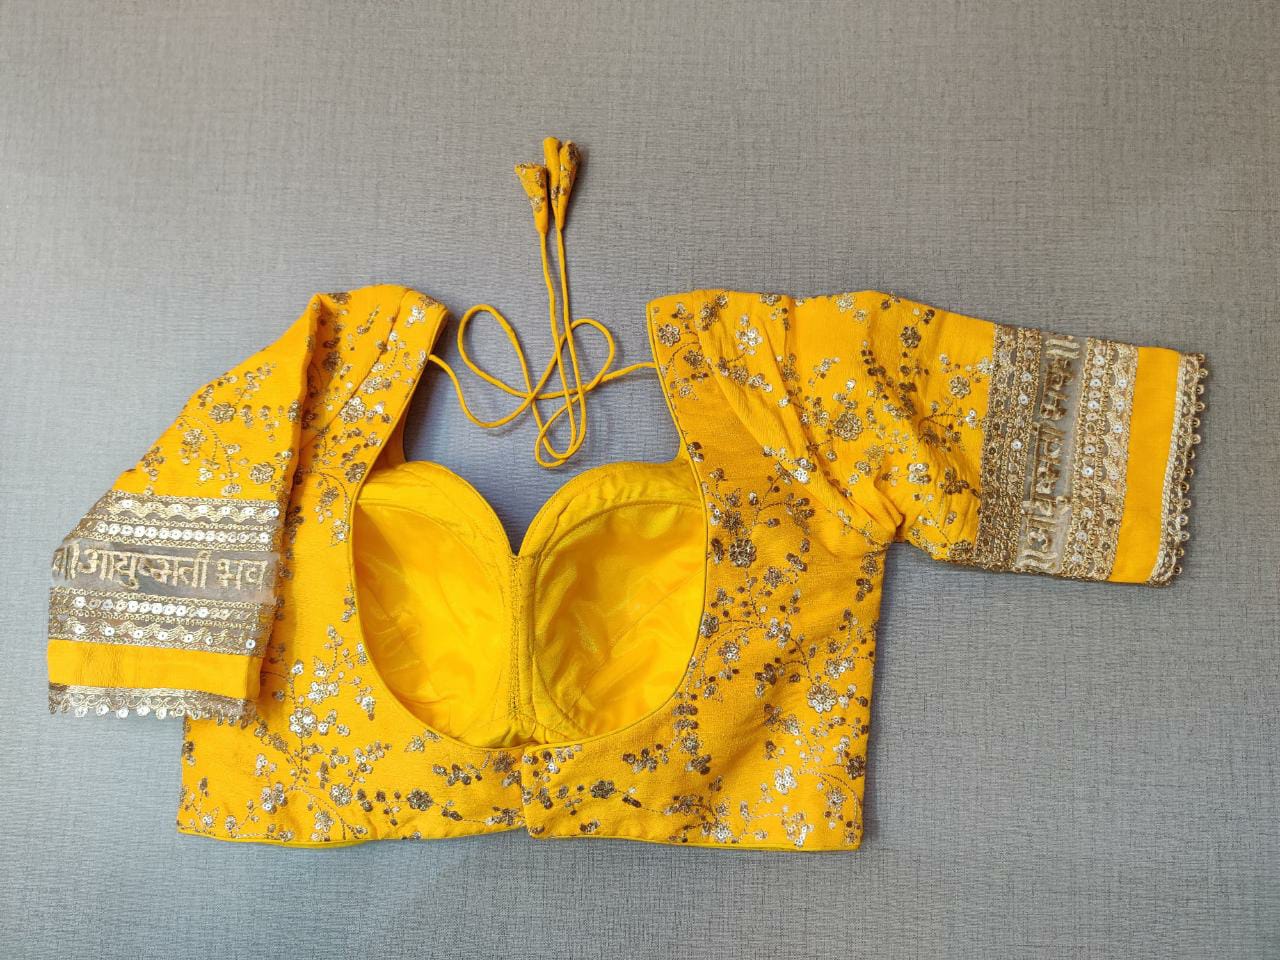 Buy yellow embroidered designer saree blouse with golden lace border,floral pattern and back open with hook online in USA. Pair this fancy designer sari blouse with mantra lace border, dori ties and long sleeve with ethnic sari, designer saree blouses online, sari blouse from Pure Elegance Indian fashion store in USA.- Back.